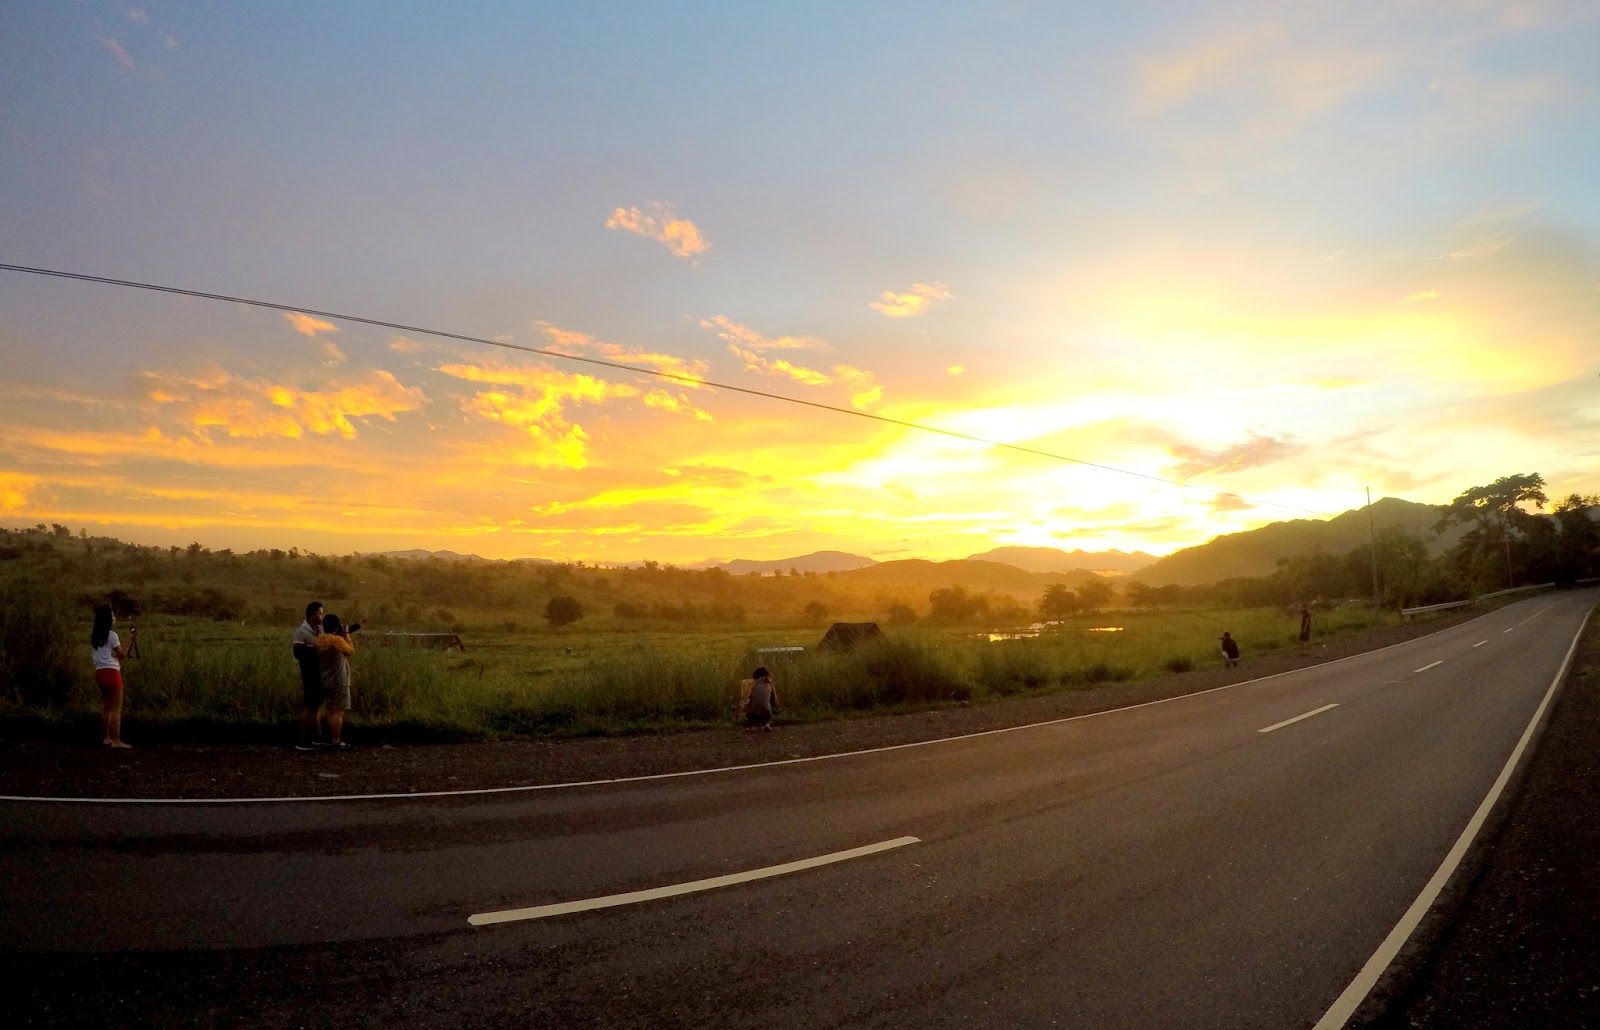 Chasing the Sunset! Pan-Philippine Highway